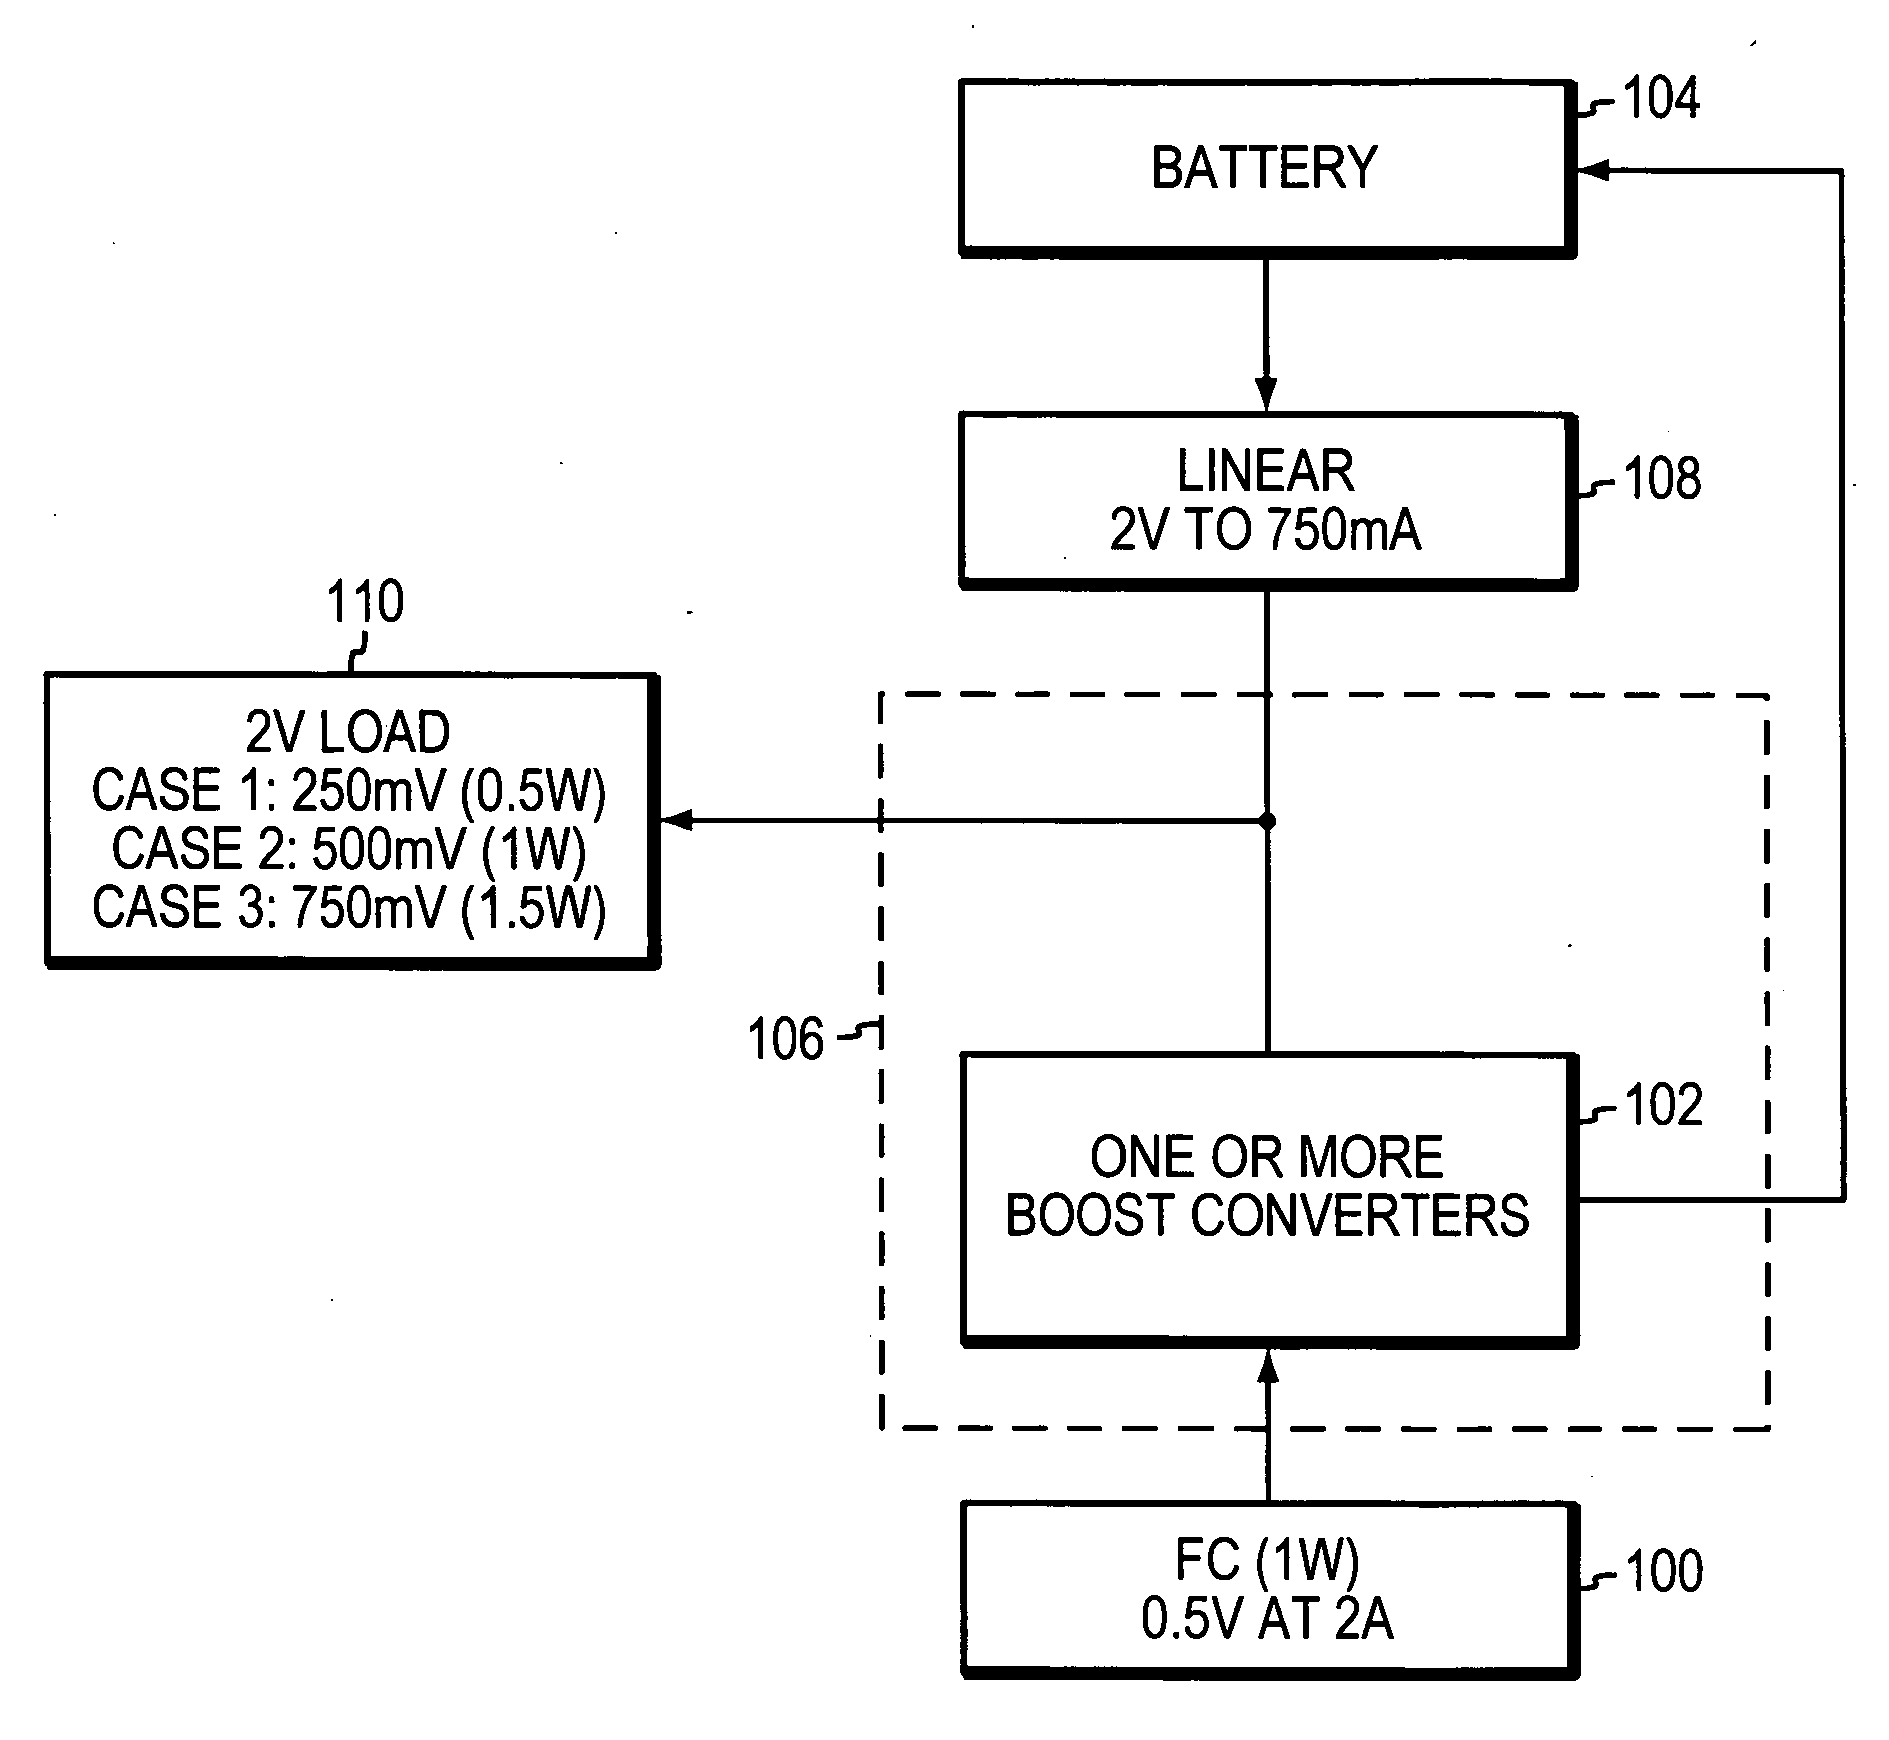 Fuel cell charger interface with multiple voltage outputs for portable devices